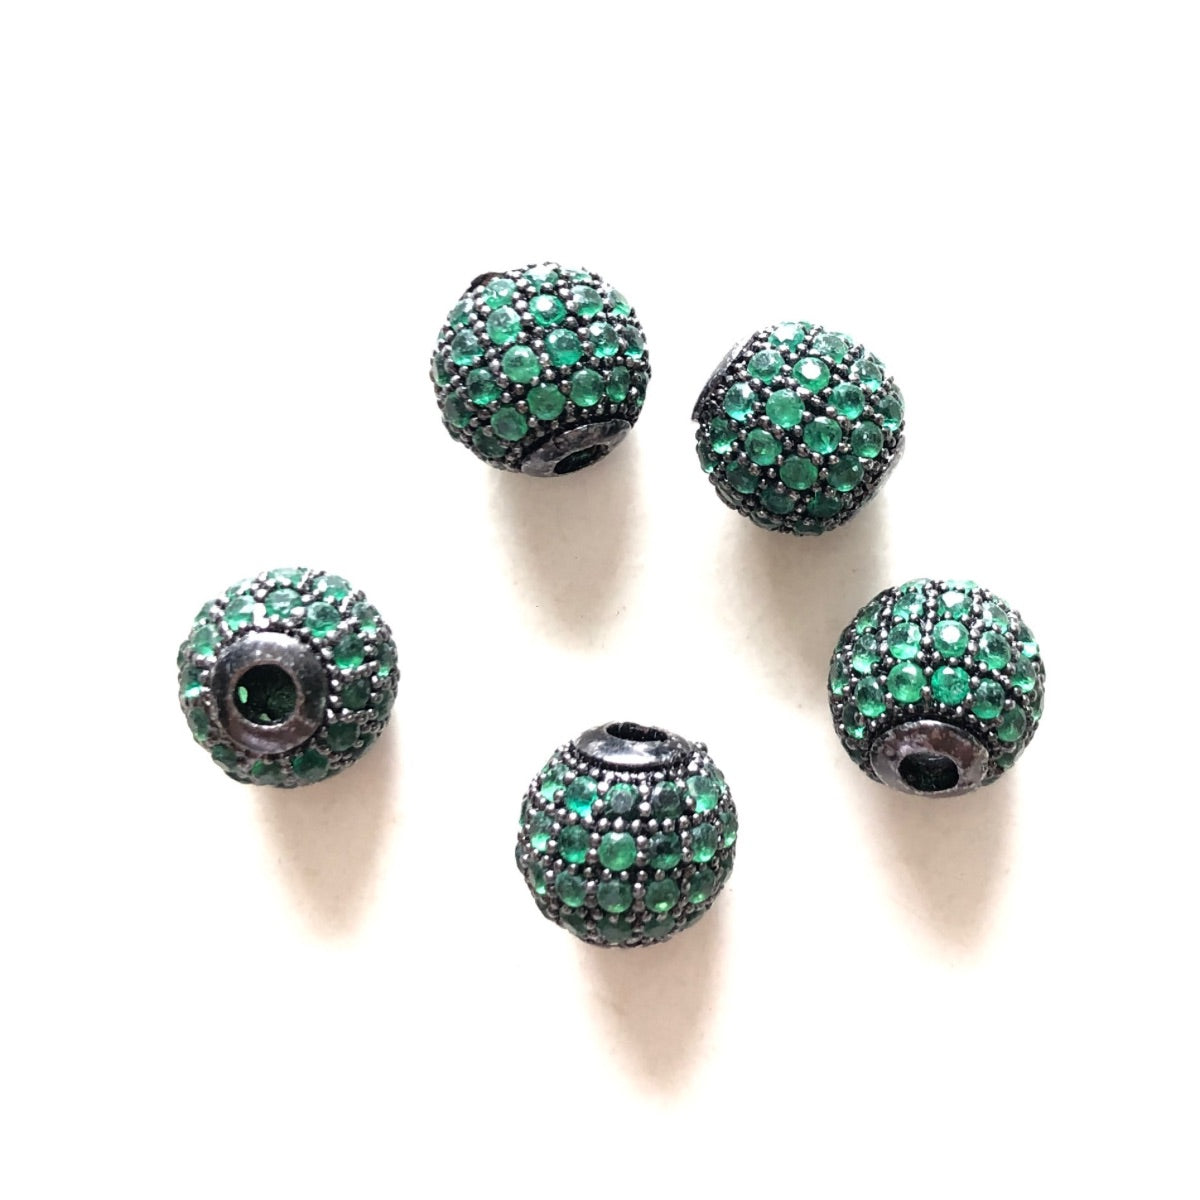 10pcs/lot 6mm, 8mm Colorful CZ Paved Ball Spacers Black Green CZ Paved Spacers 6mm Beads 8mm Beads Ball Beads Colorful Zirconia New Spacers Arrivals Charms Beads Beyond